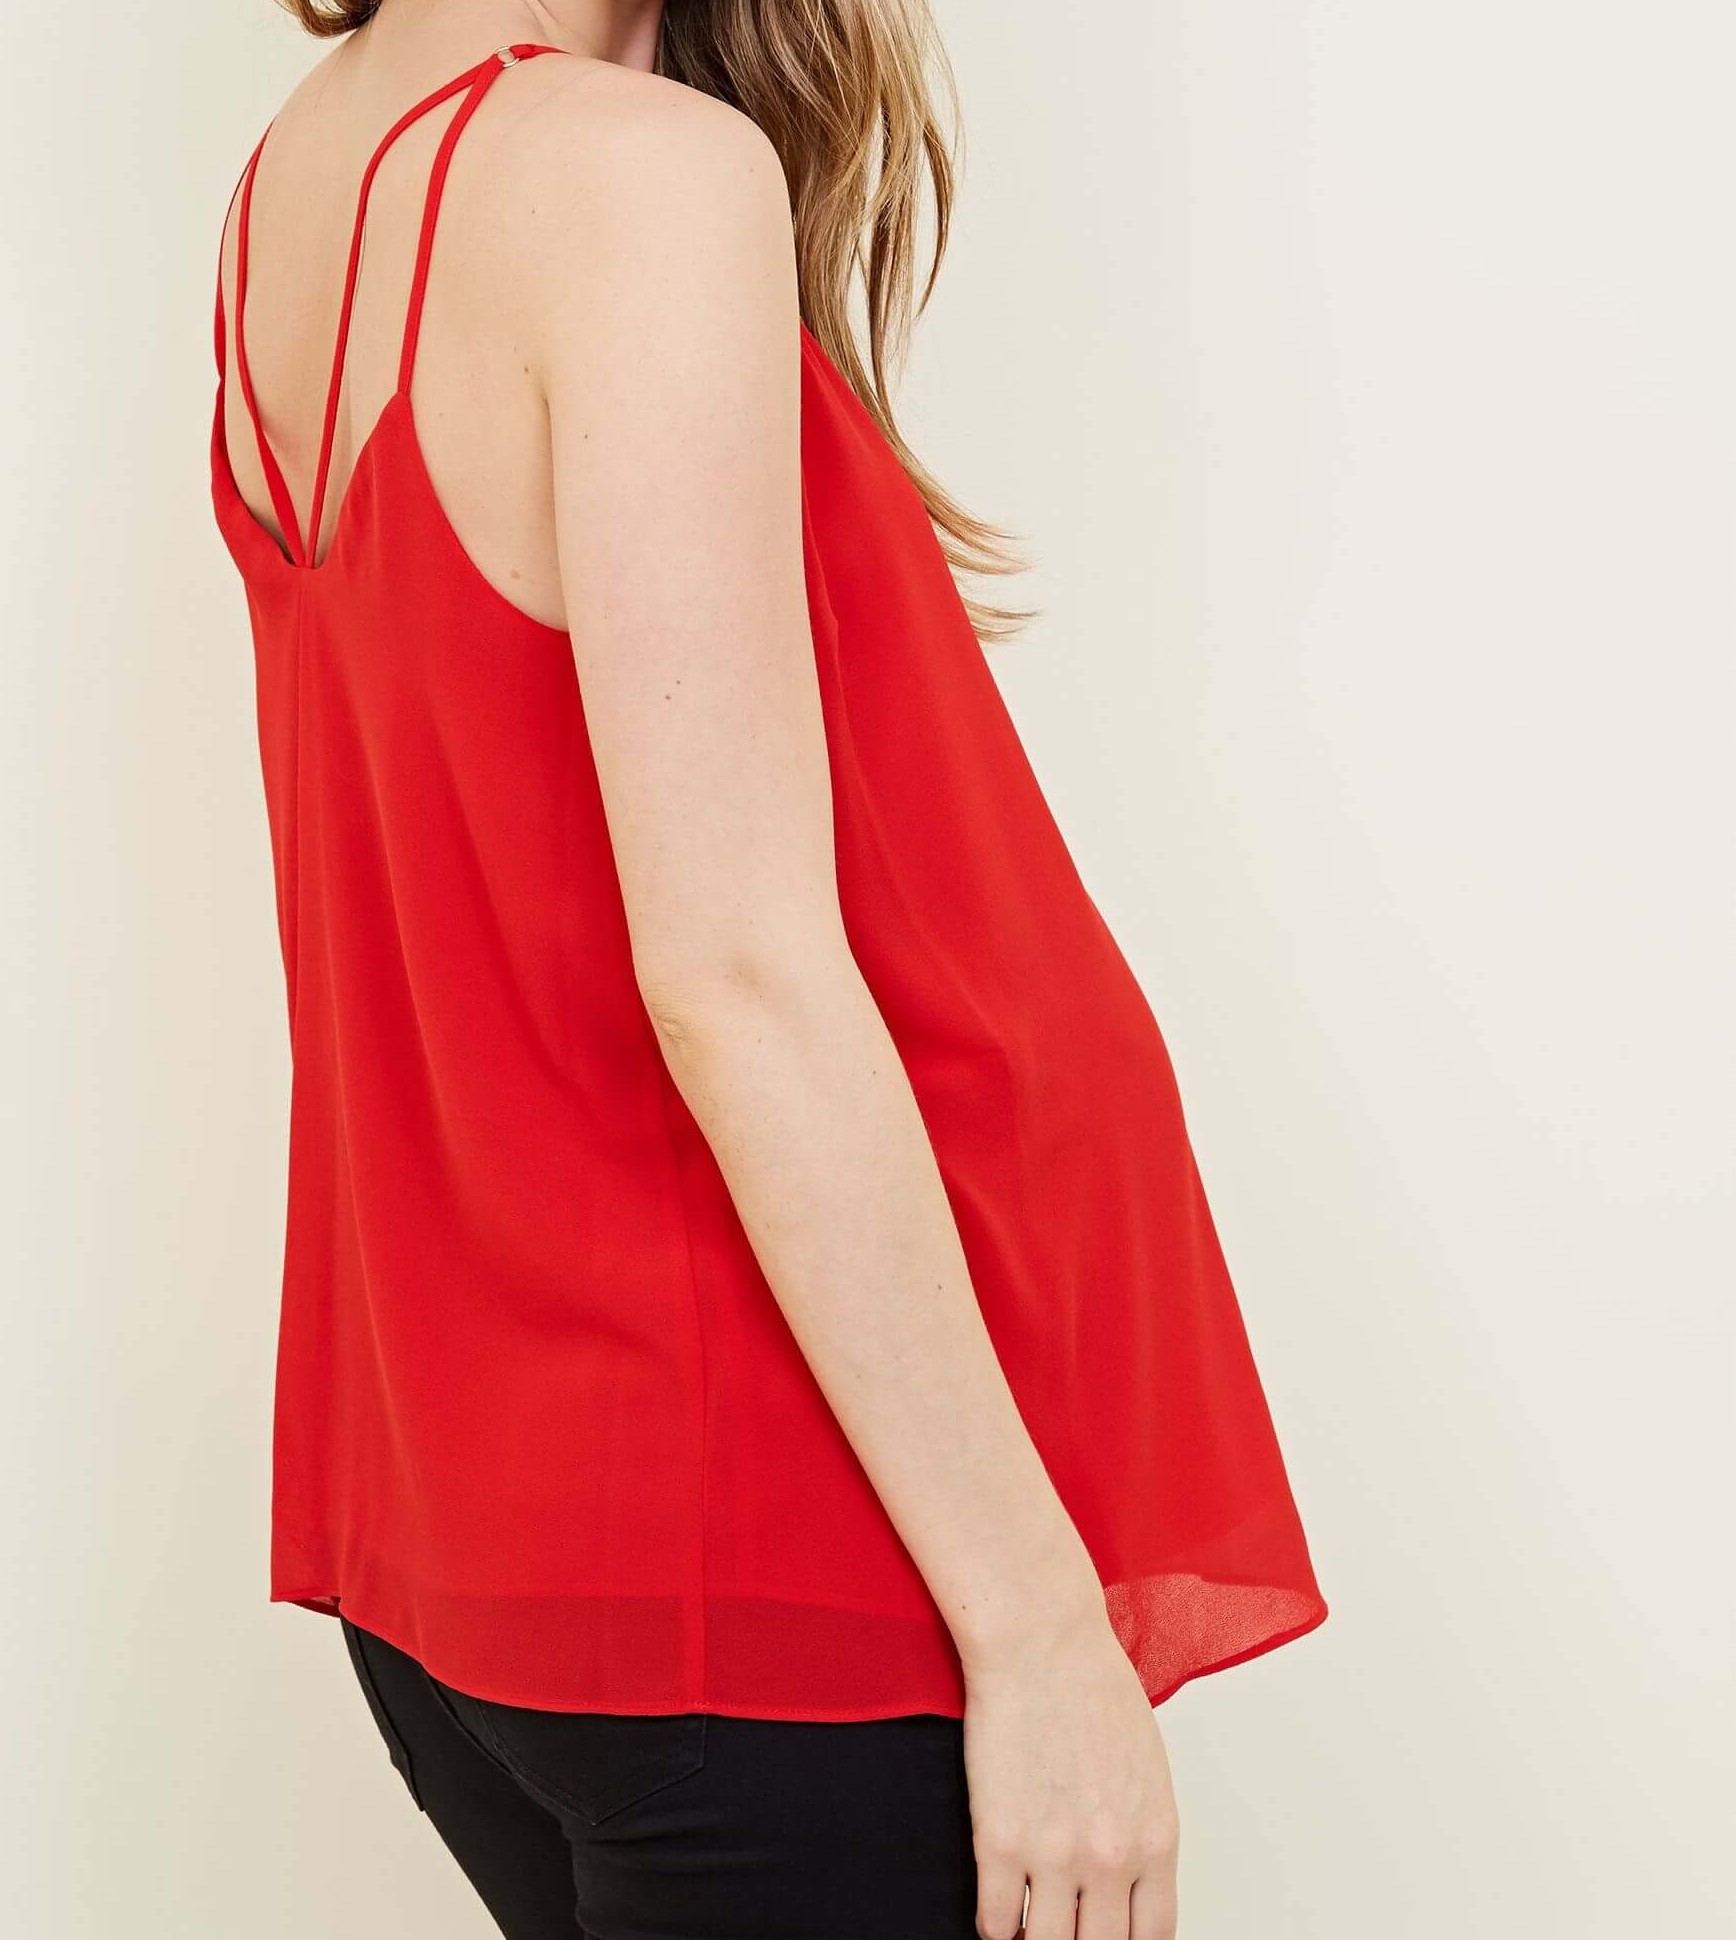 Ex T*PSh*P Red Maternity Top, £3.00pp, RRP £29.00